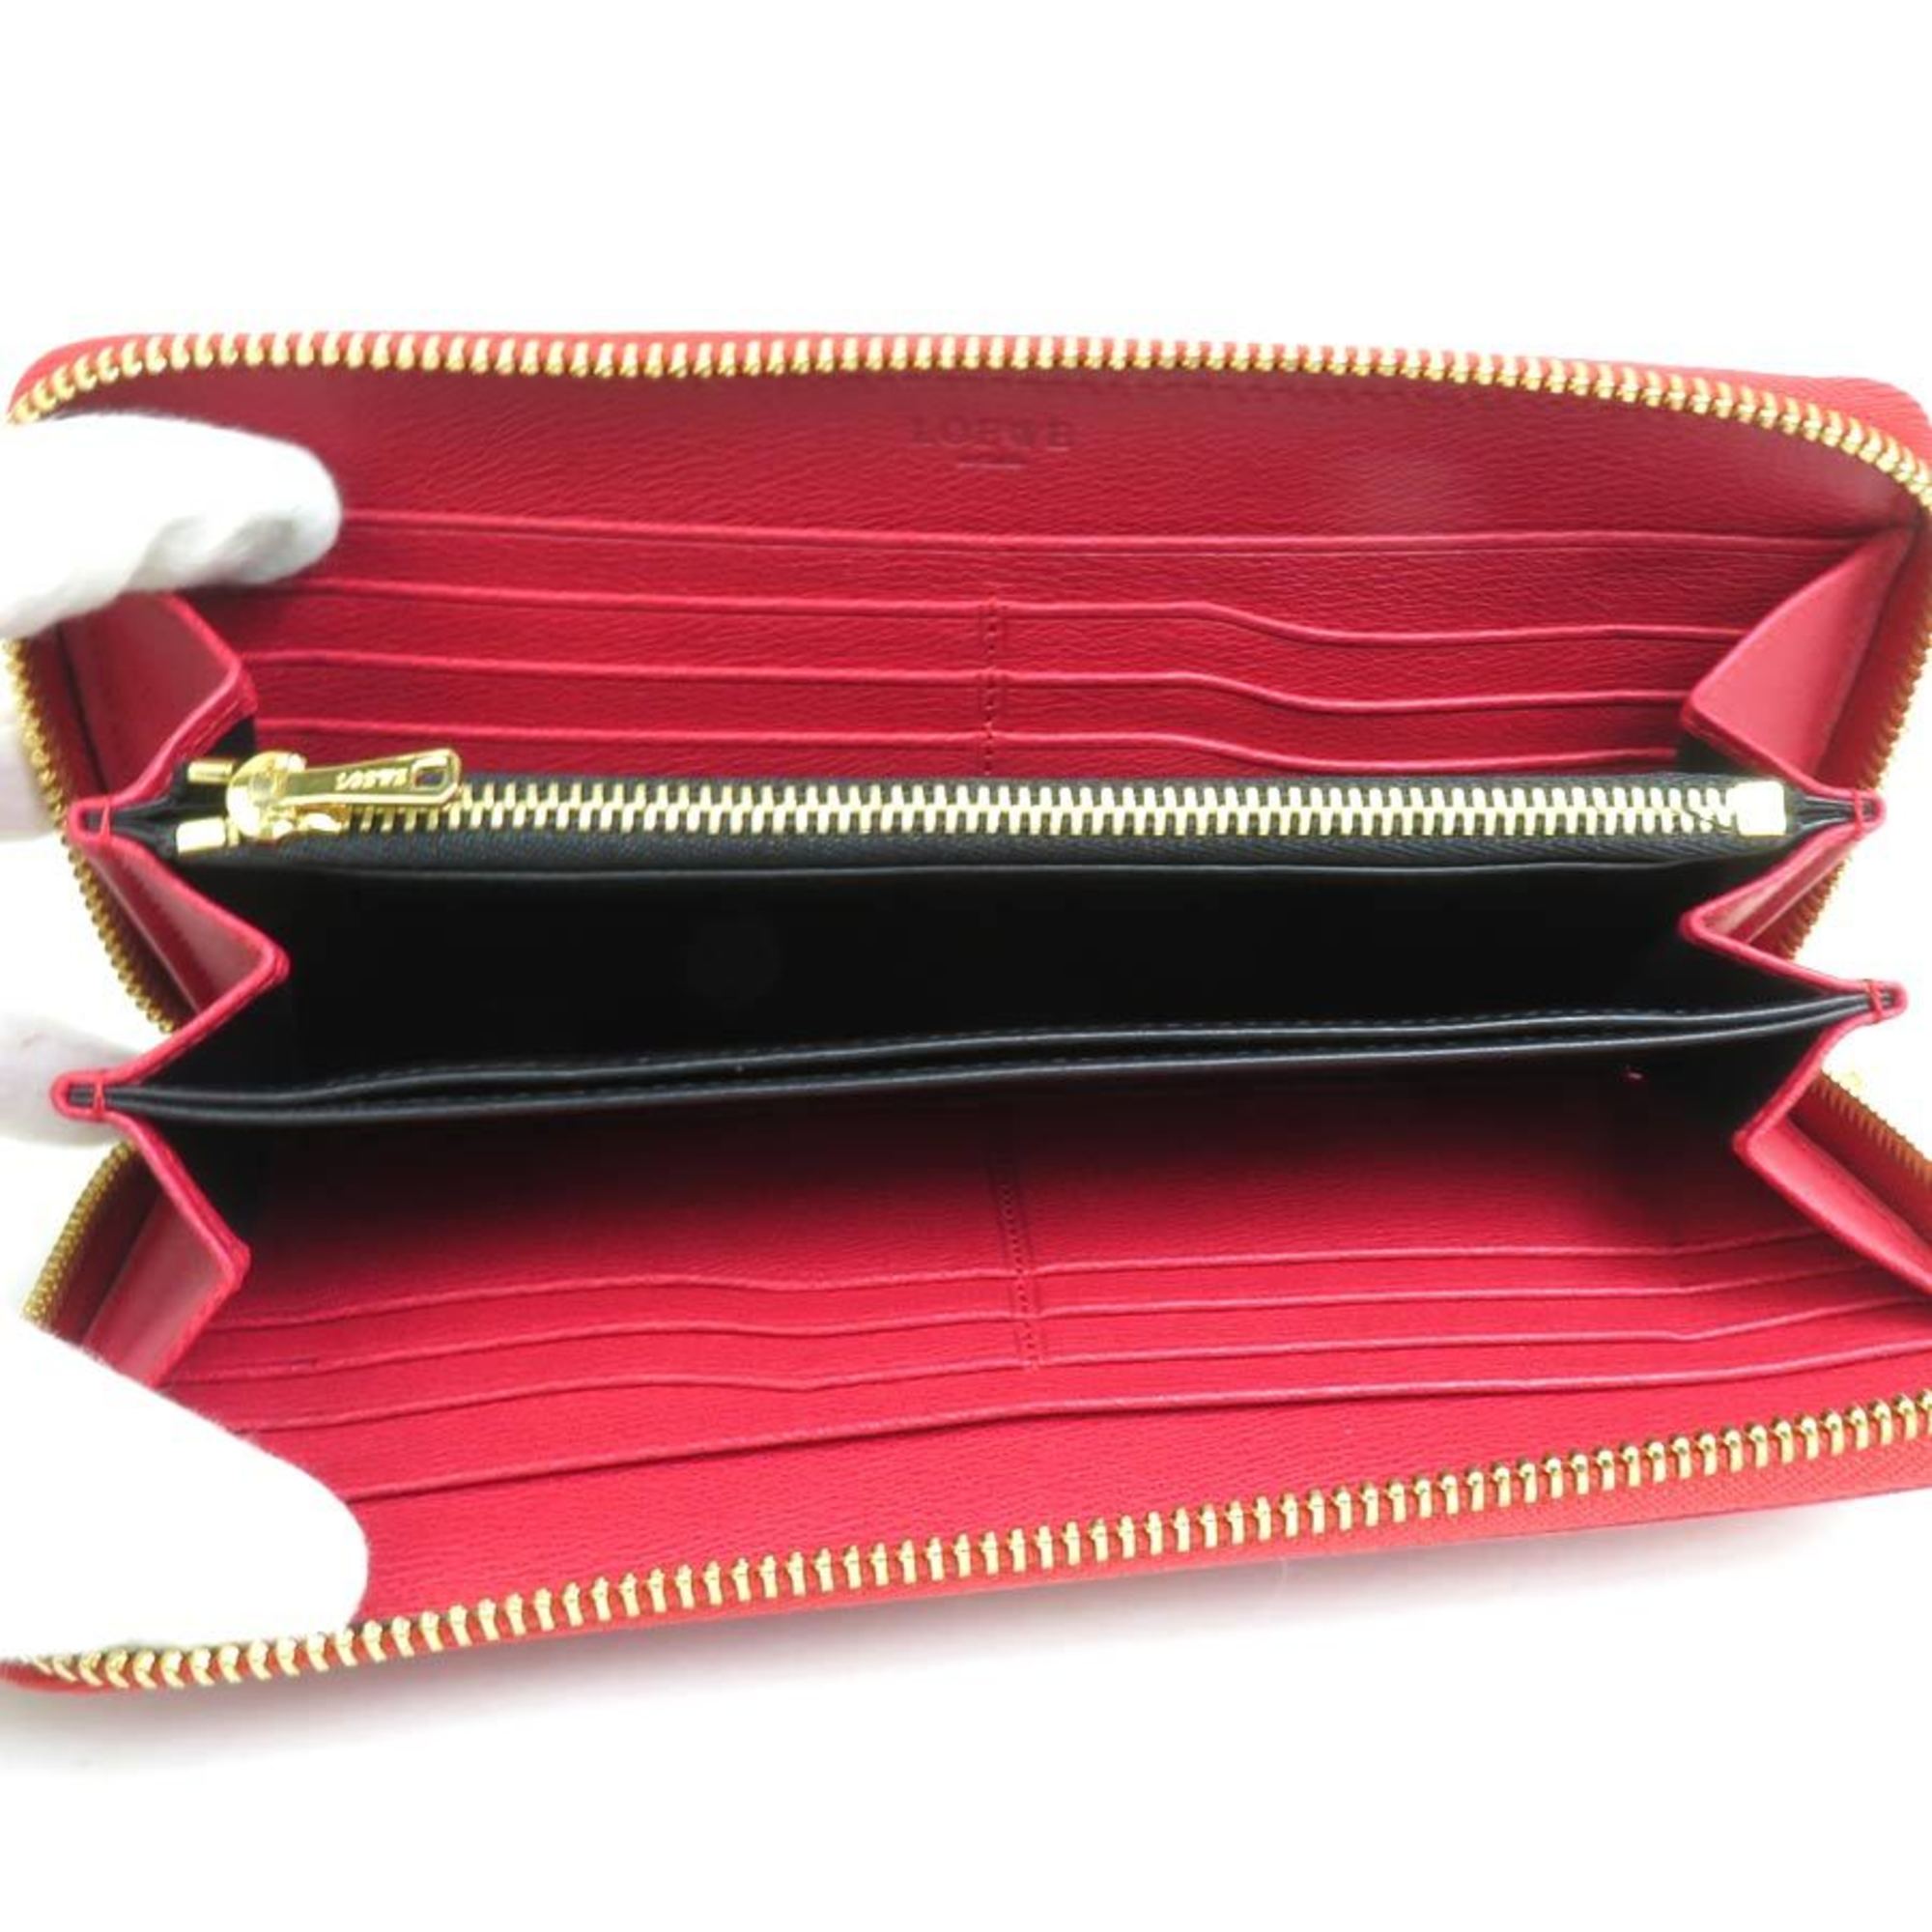 LOEWE Round Long Wallet Leather Red